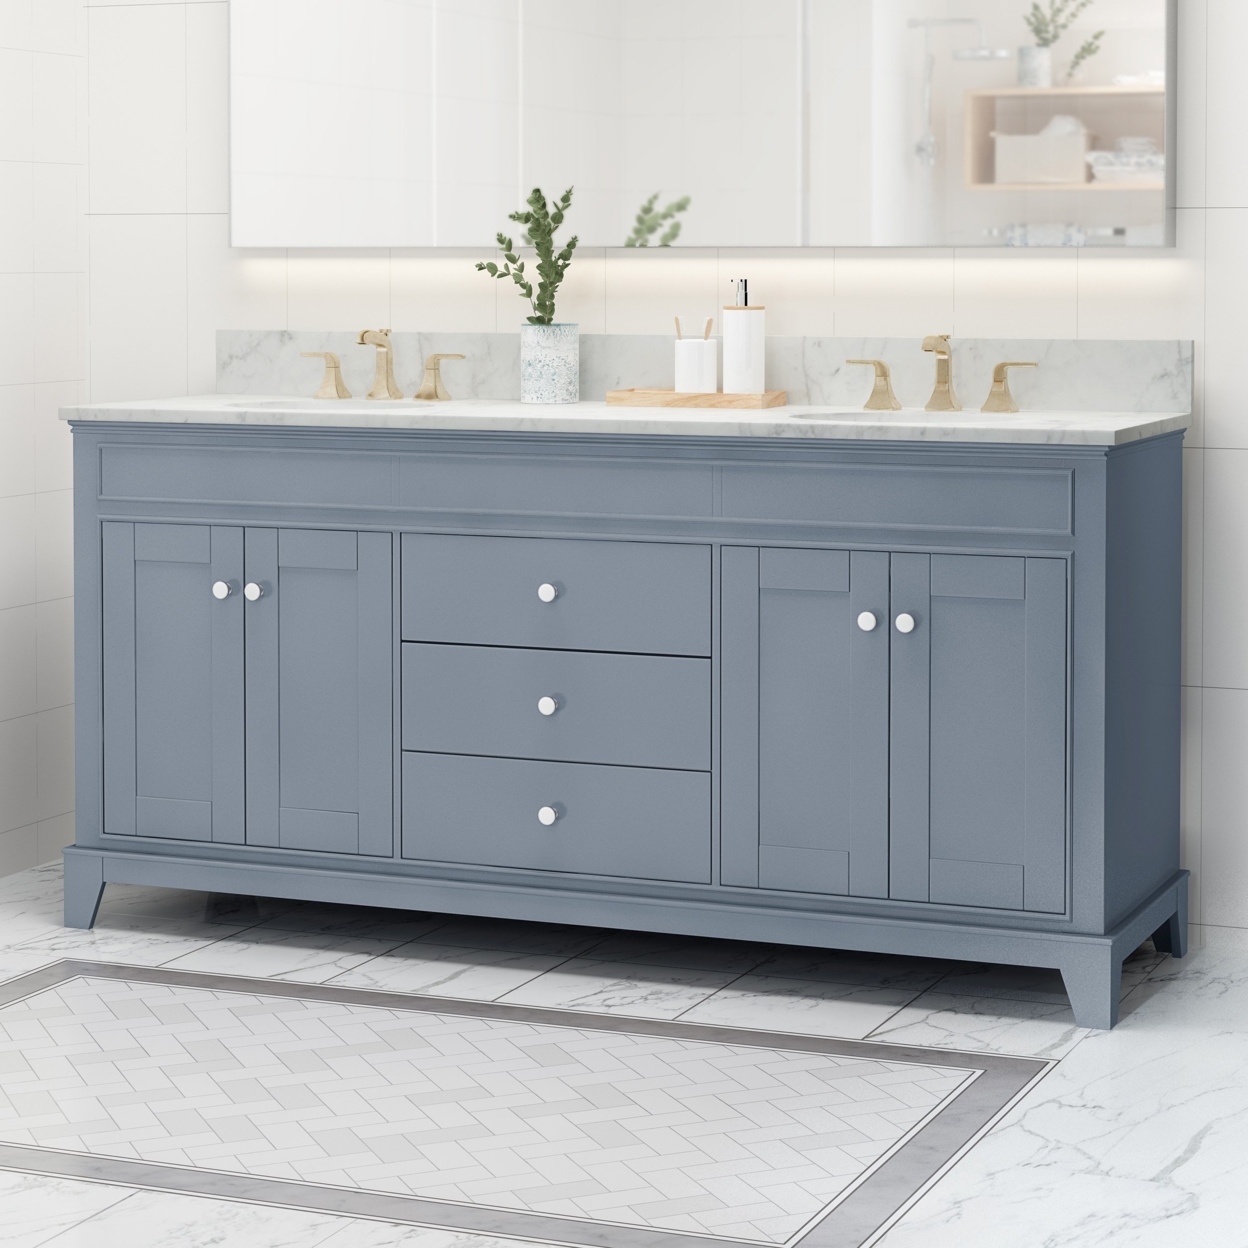 Feldspar Contemporary 72 Wood Bathroom Vanity (Counter Top Not Included) - White